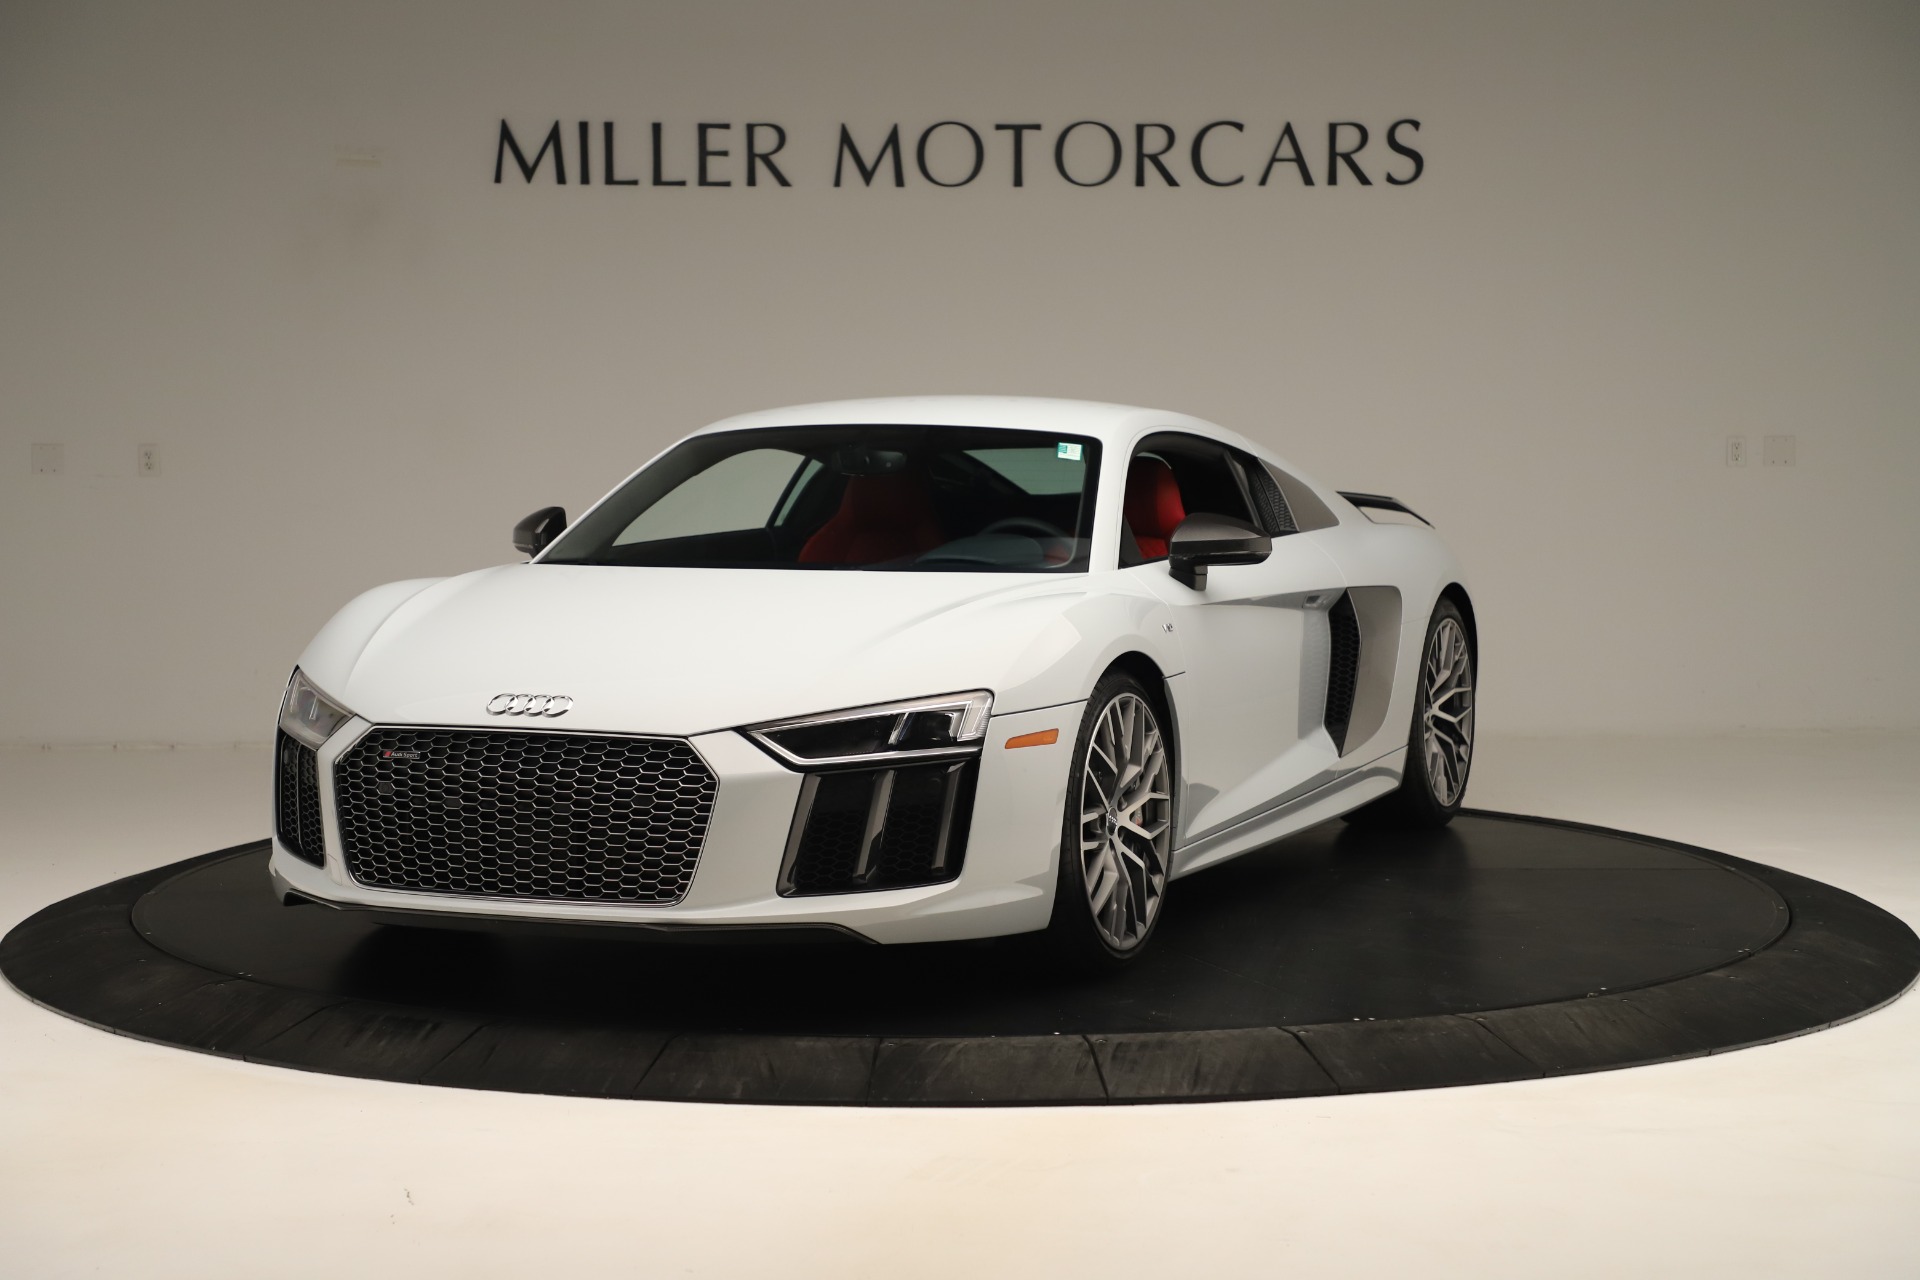 Used 2018 Audi R8 5.2 quattro V10 Plus for sale Sold at Bentley Greenwich in Greenwich CT 06830 1